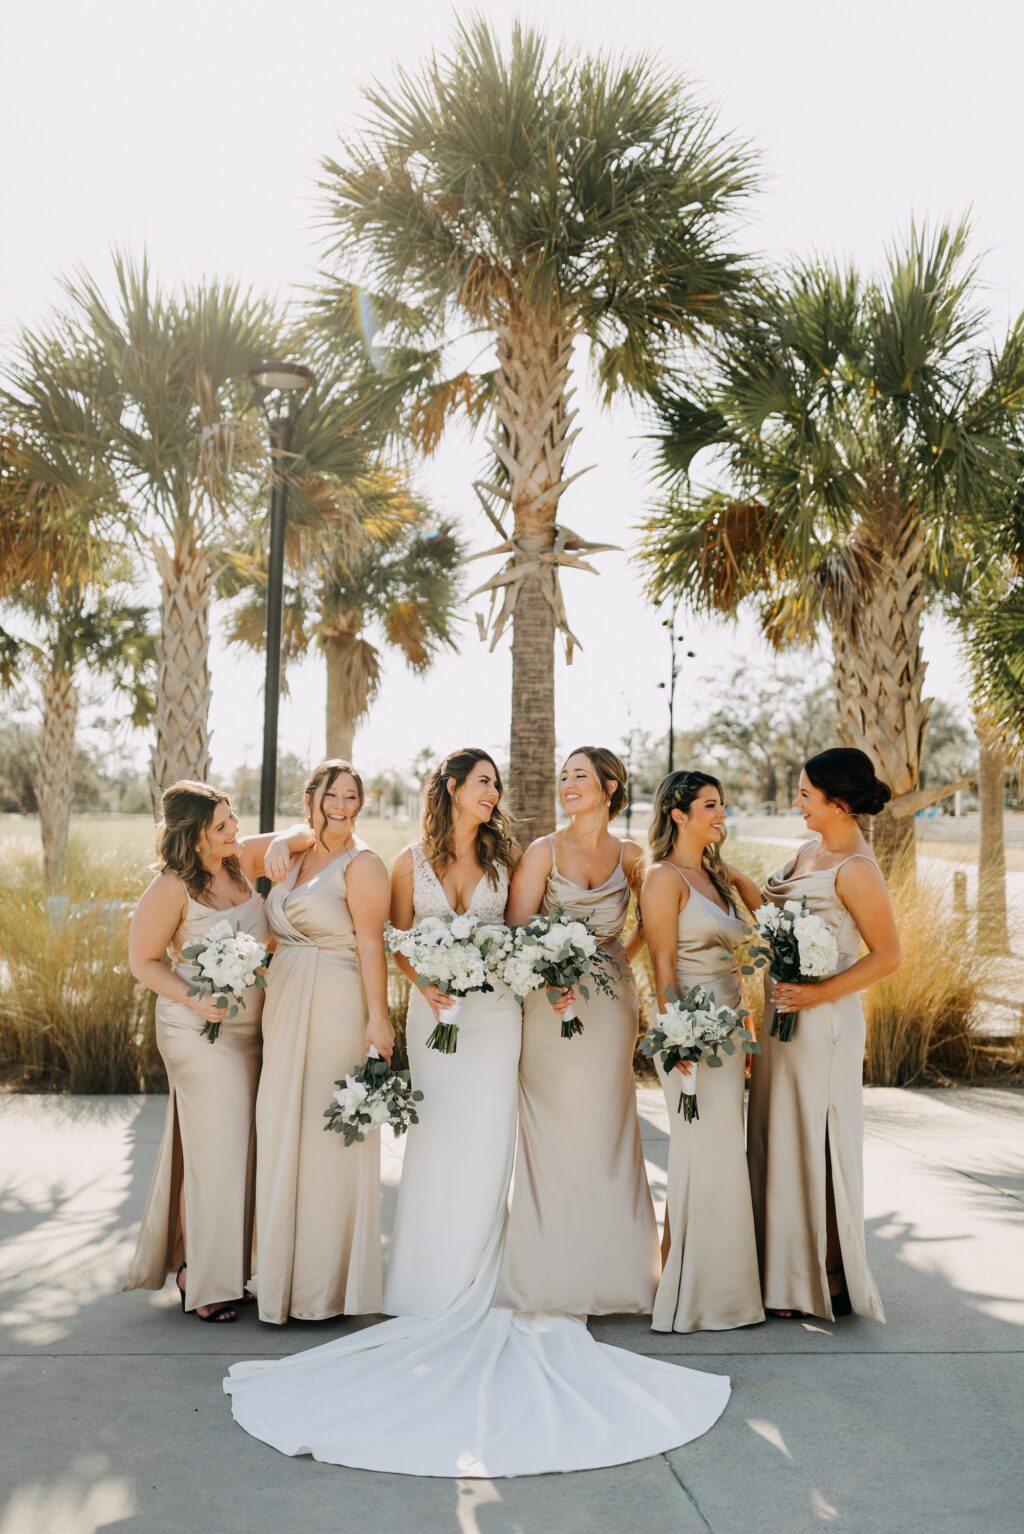 Matching Satin Champagne and Floor Length Bridesmaids Wedding Dresses Ideas | Tampa Wedding Photographer Amber McWhorter Photography